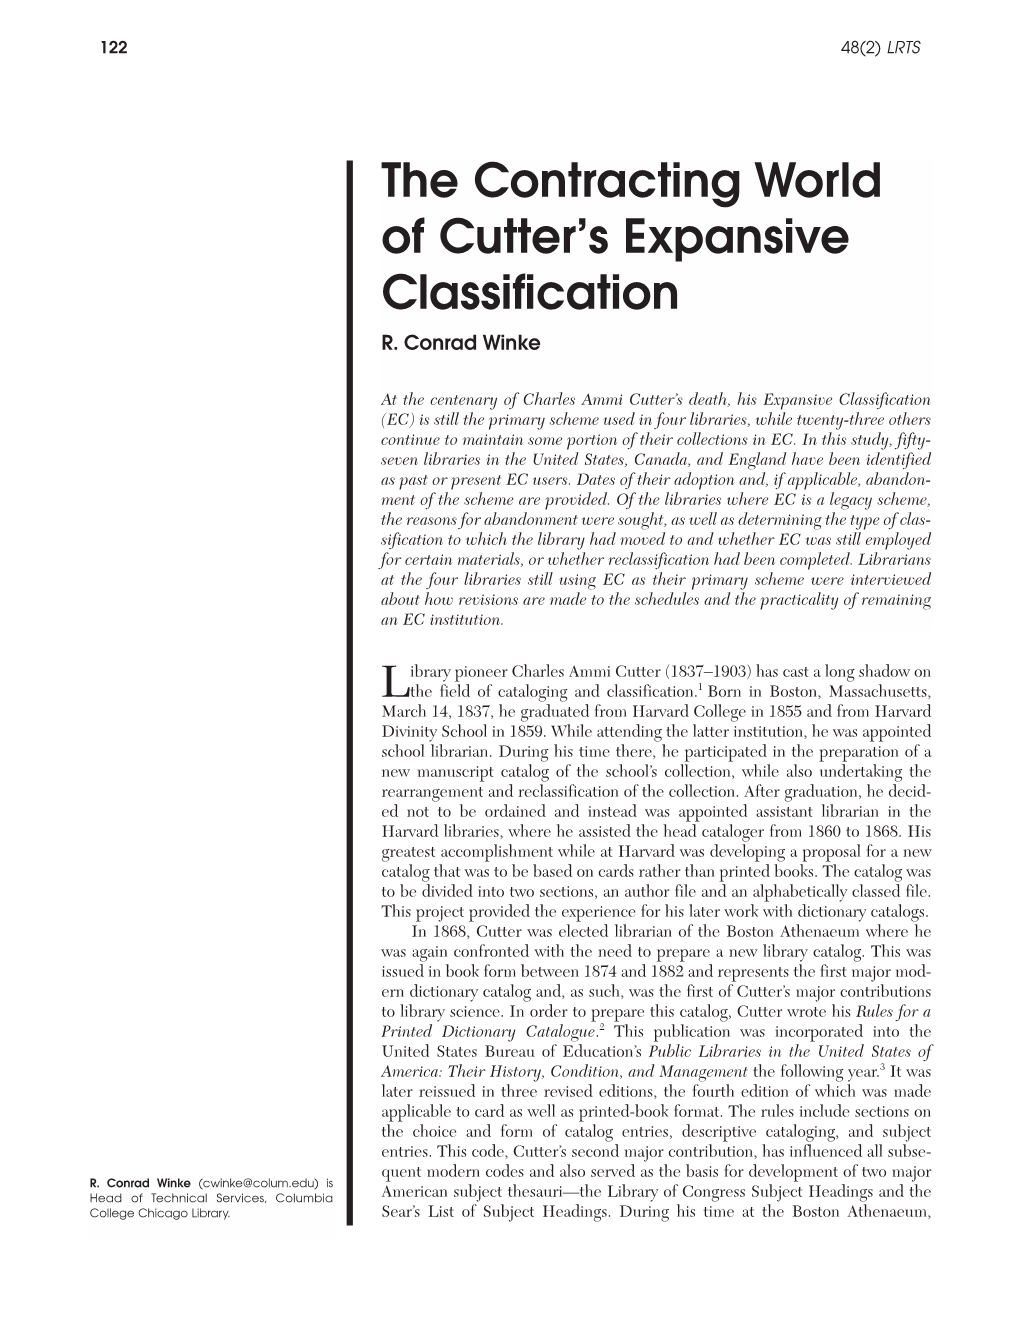 The Contracting World of Cutter's Expansive Classification